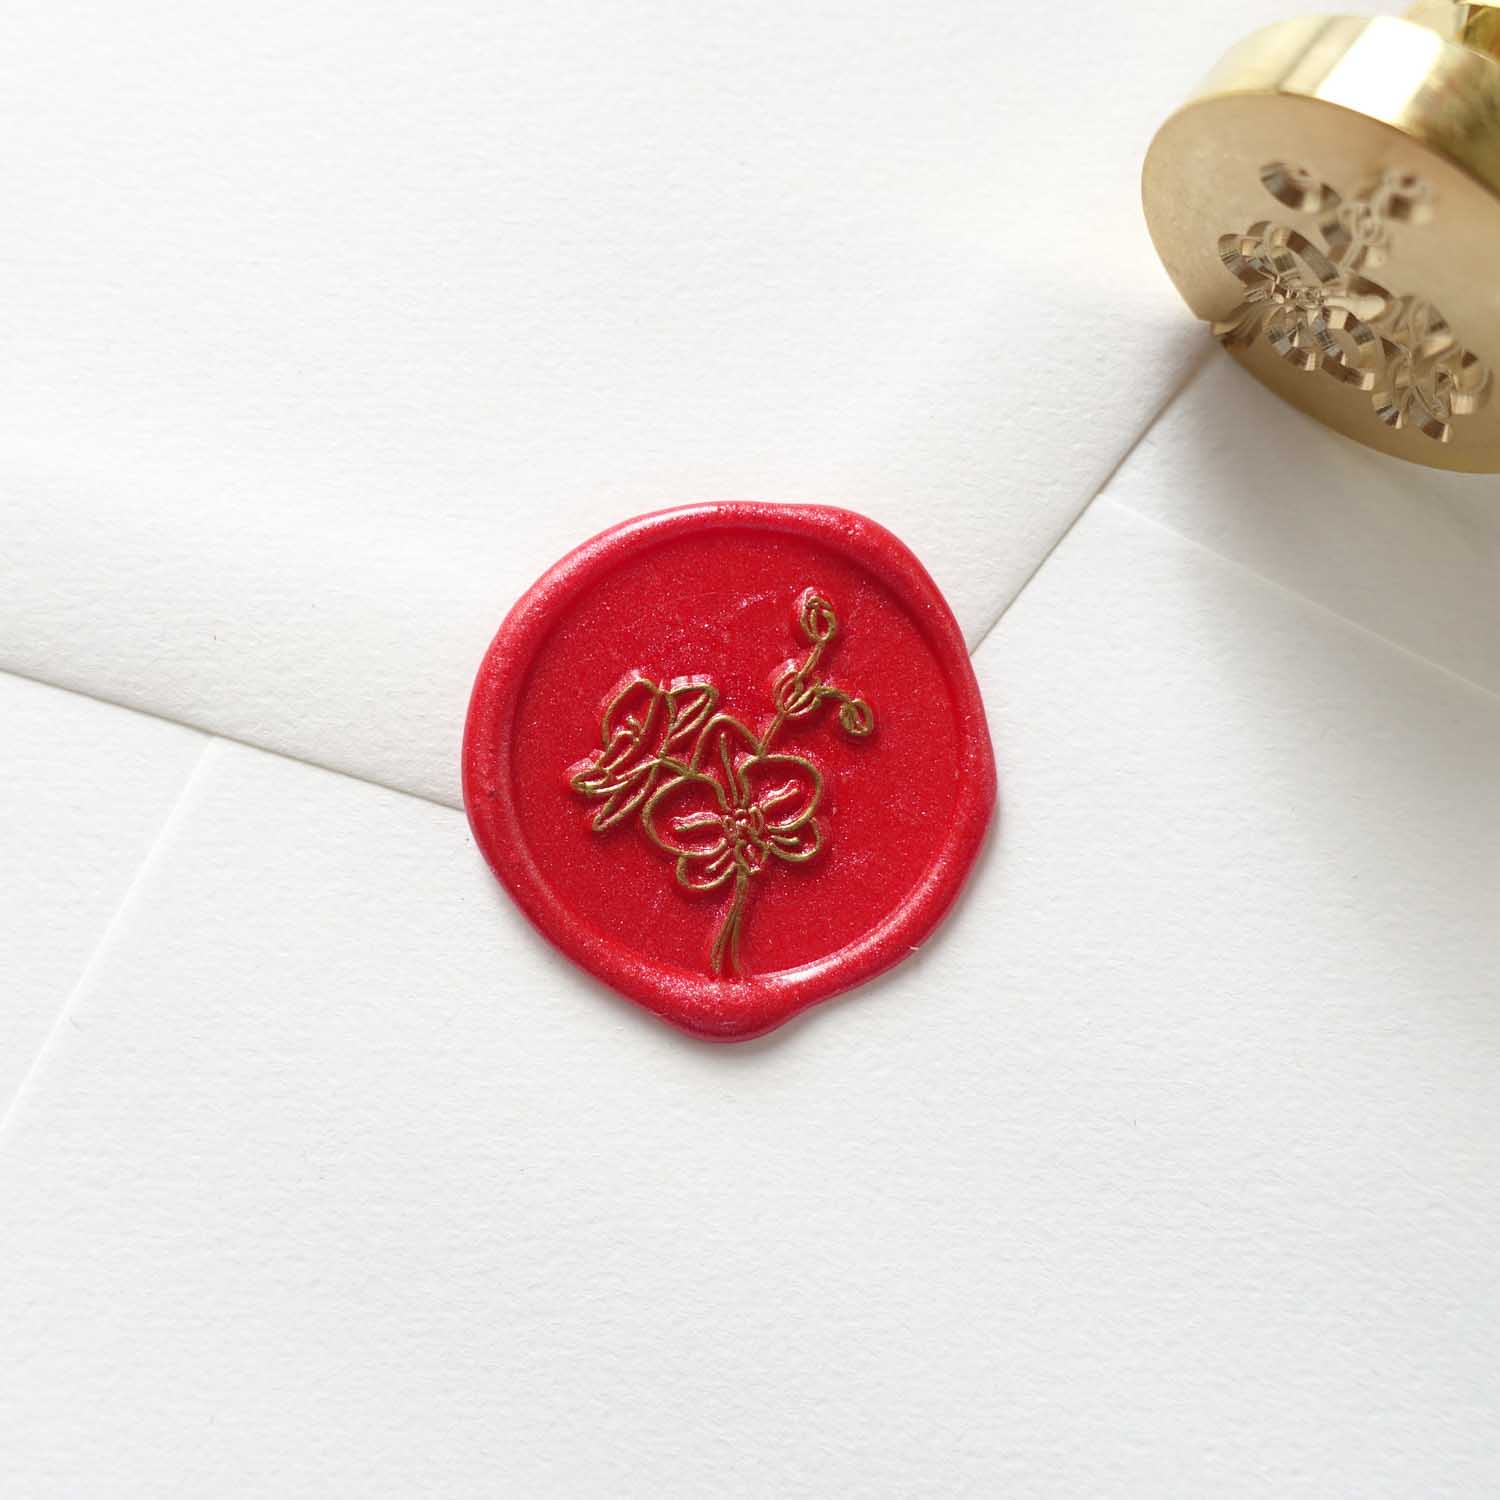 Orchid wax seal stamp Australia